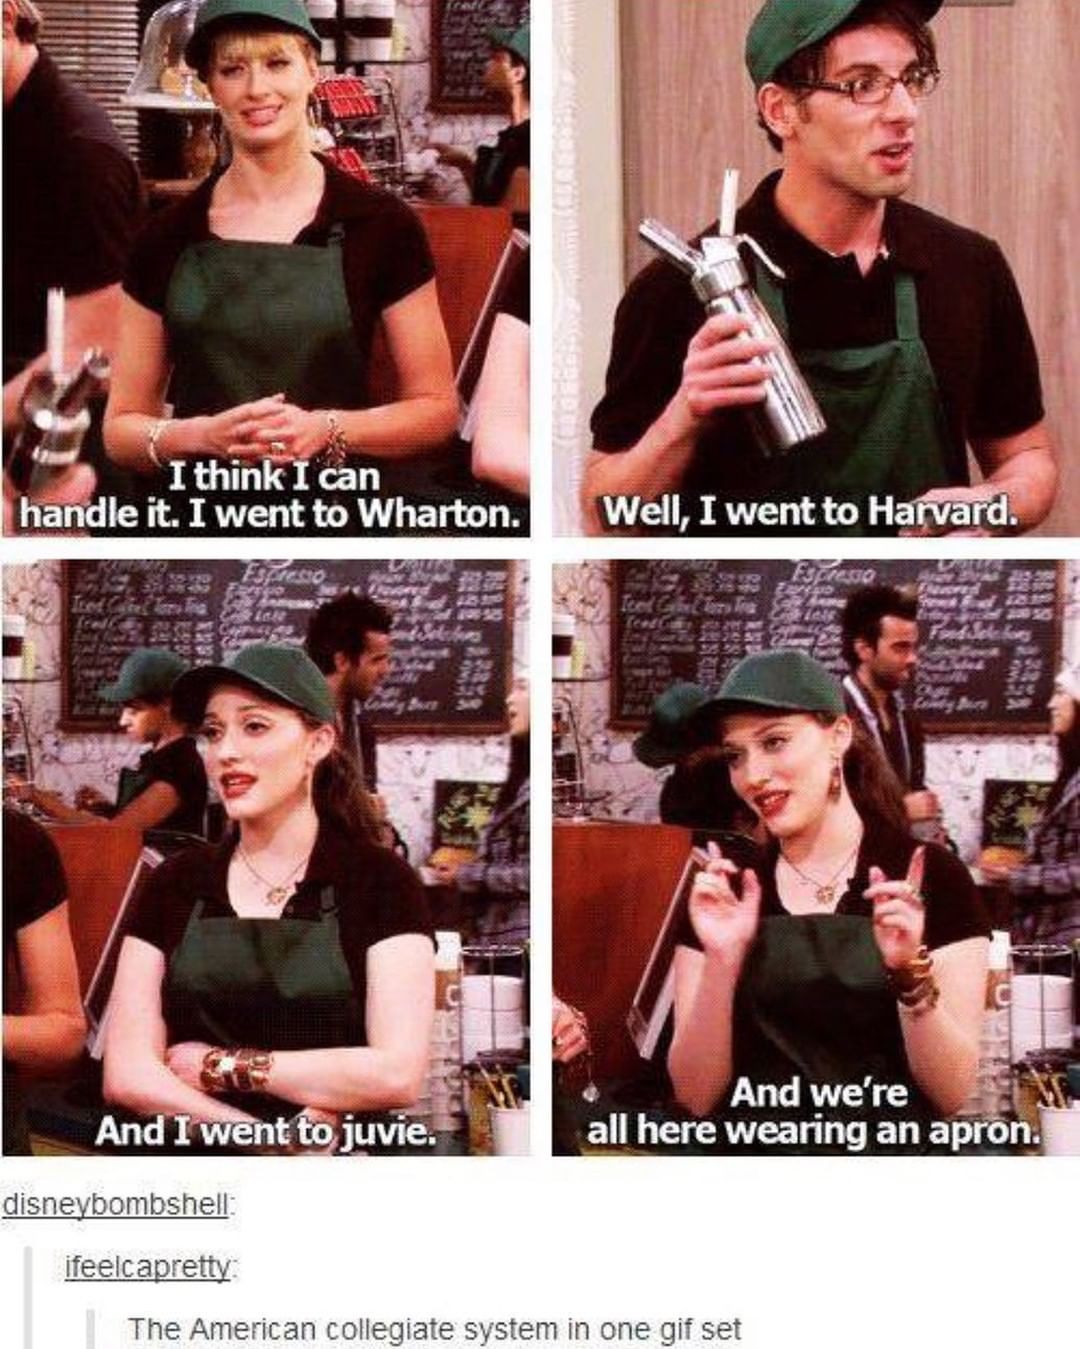 two broke girls quotes - I think I can handle it. I went to Wharton. Well, I went to Harvard. And I went to juvie. And we're all here wearing an apron. disneybombshell ifeelcapretty The American collegiate system in one gif set